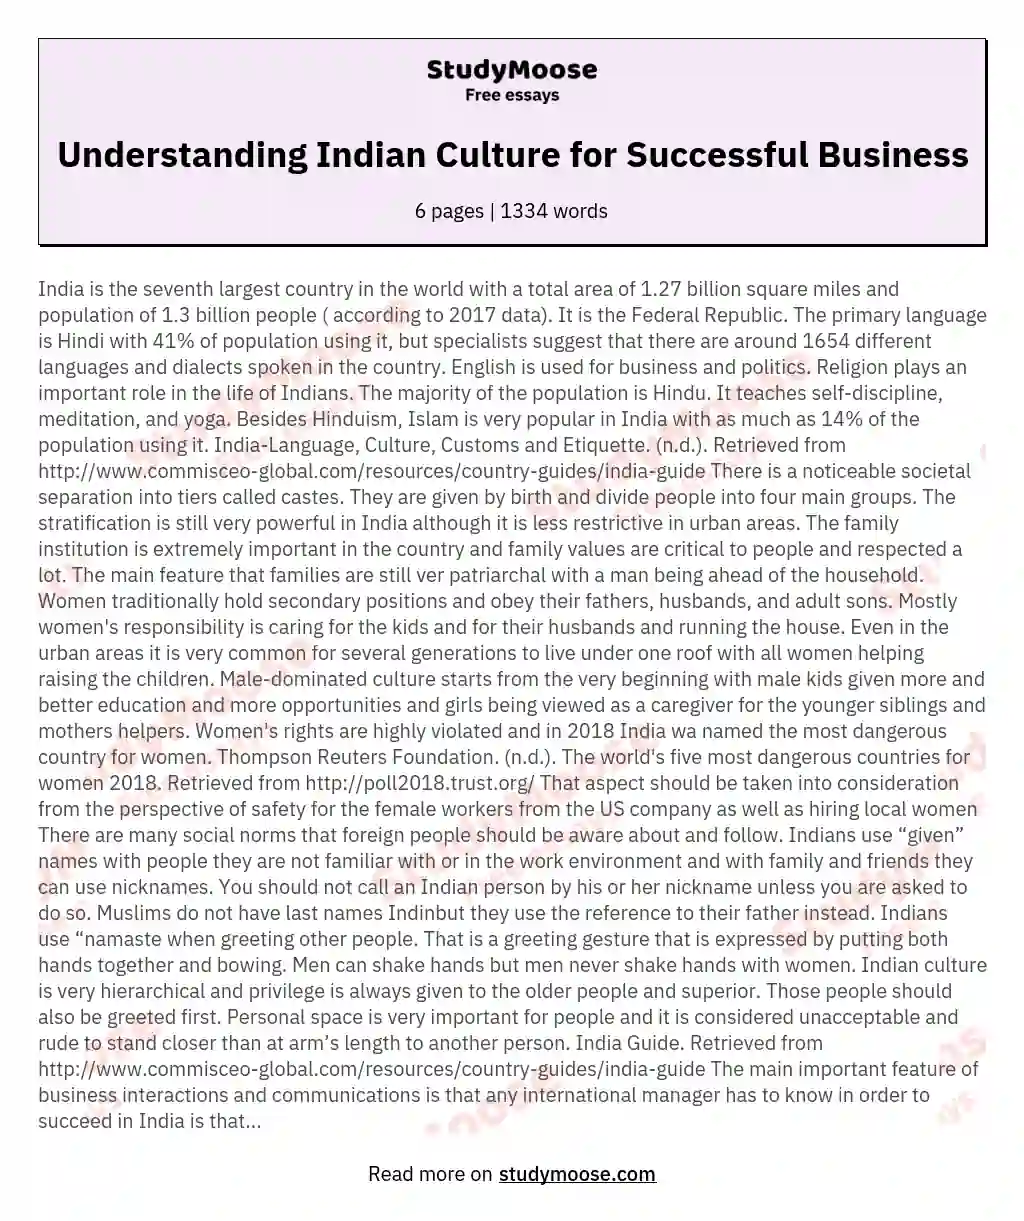 Understanding Indian Culture for Successful Business essay